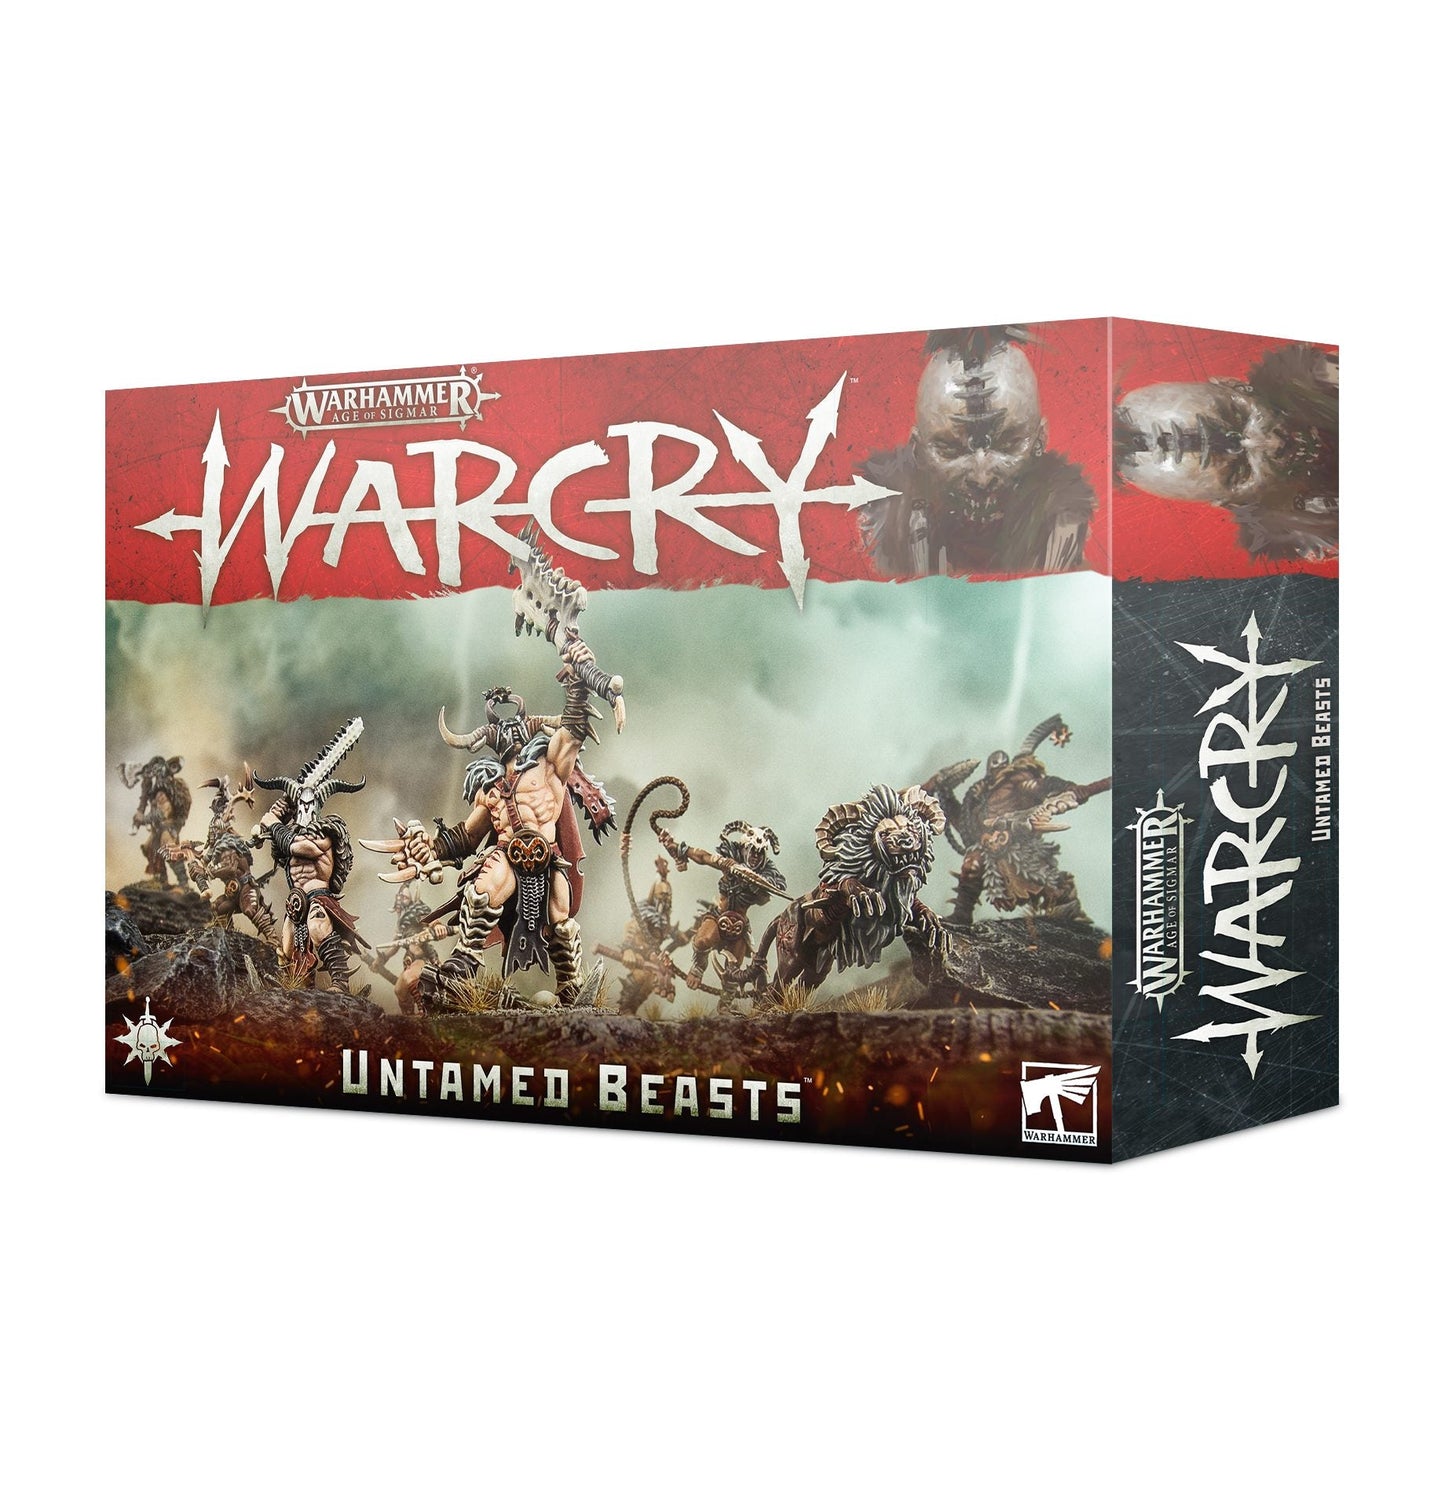 Warcry: Untamed Beasts - Gamescape